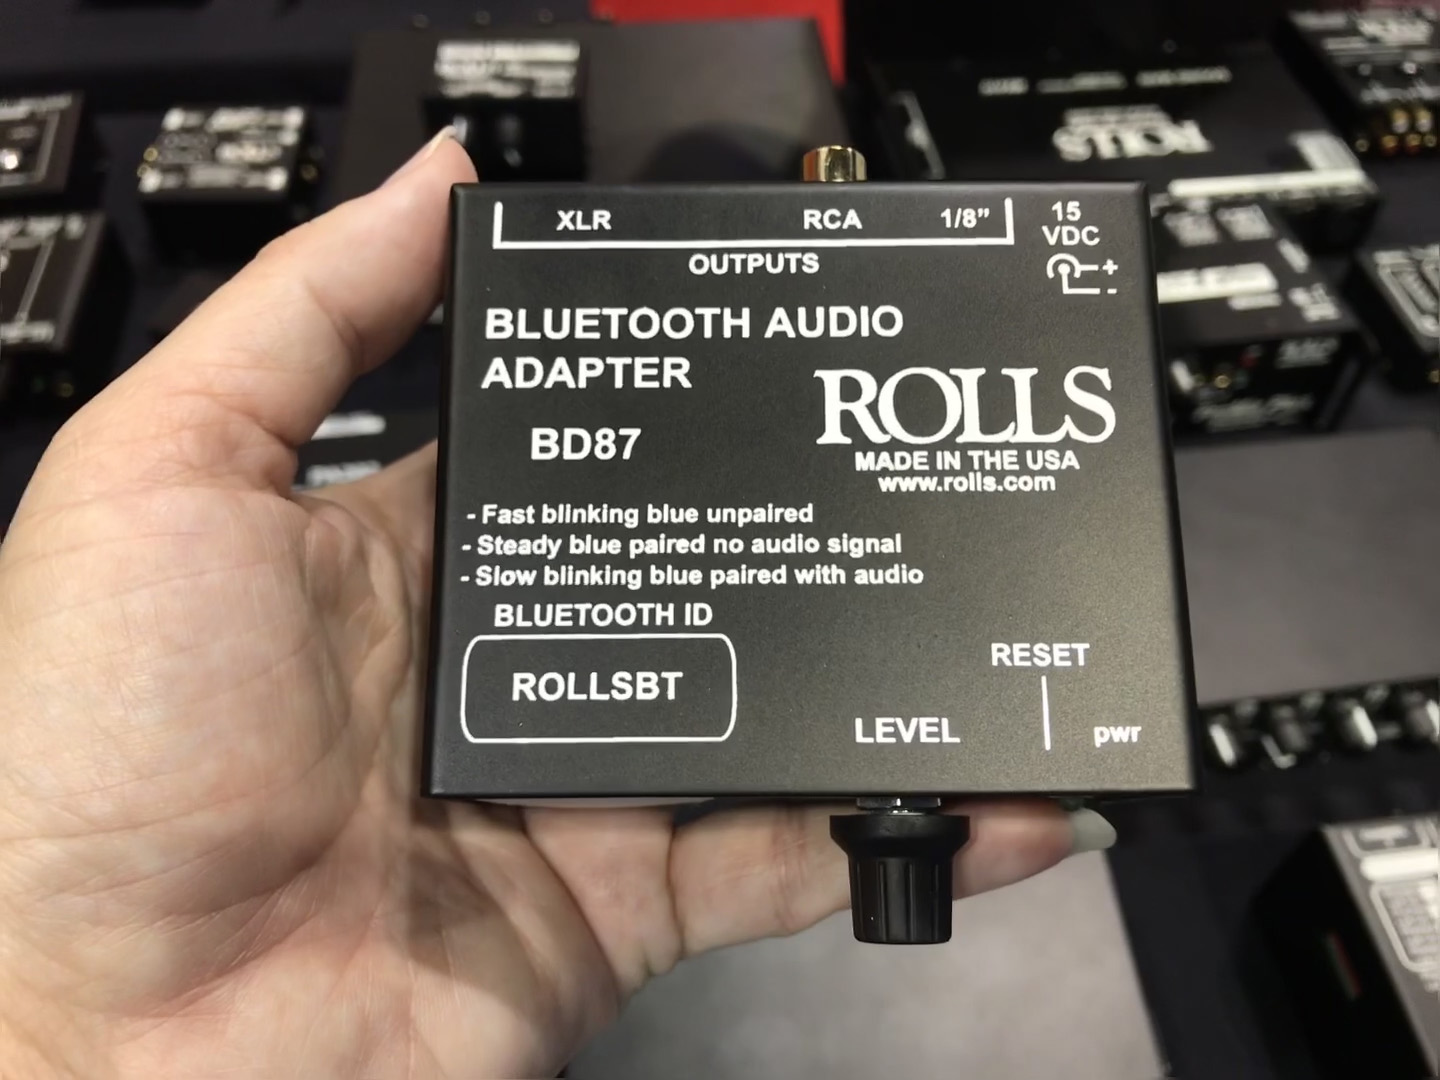 BD87 Bluetooth Audio Adapter by Rolls